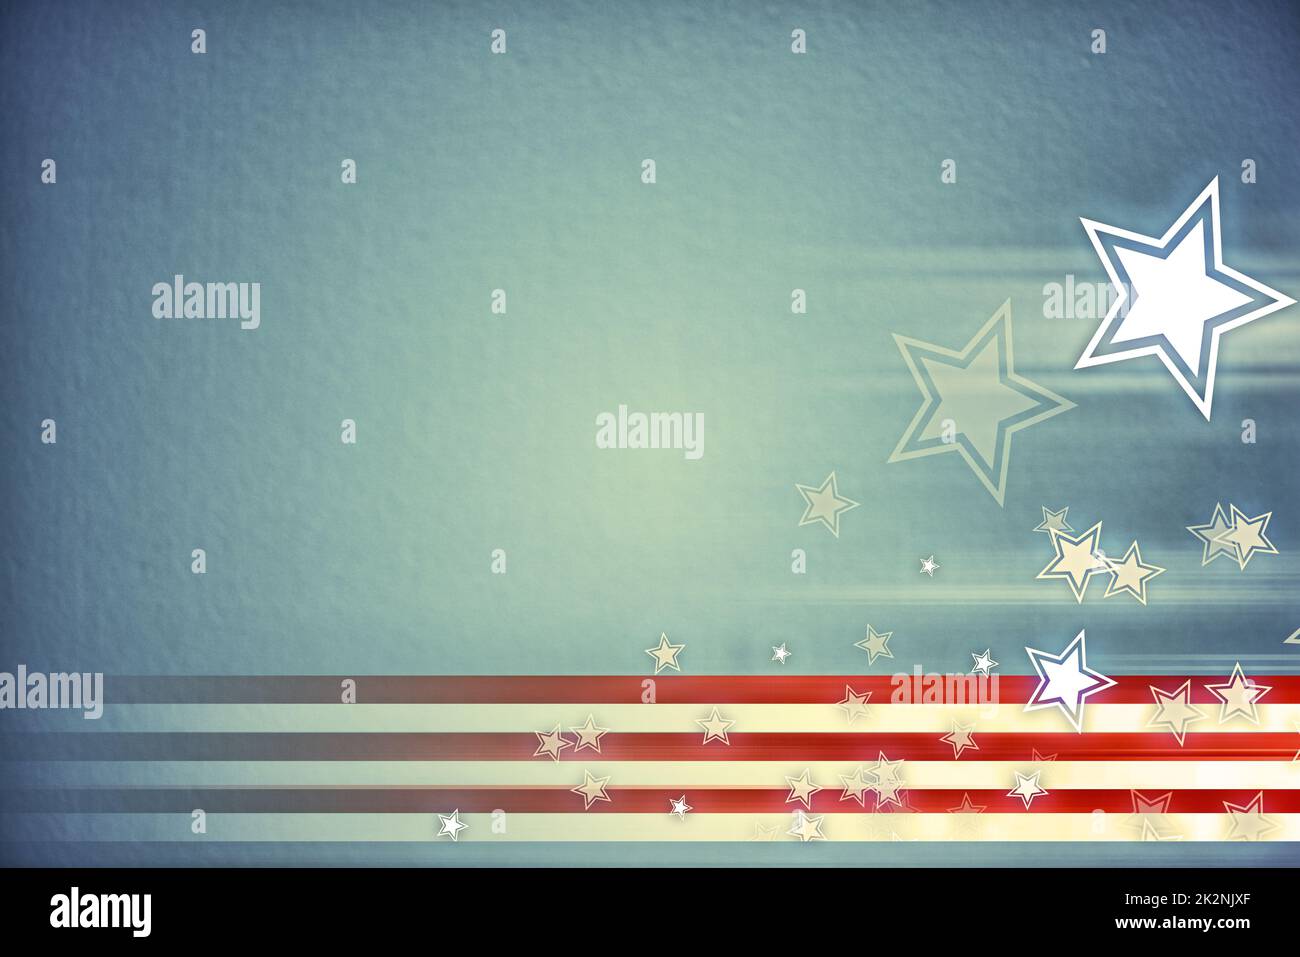 For a country who has proudly earned their stripes. Illustration of an American themed background consisting of stars and stripes. Stock Photo